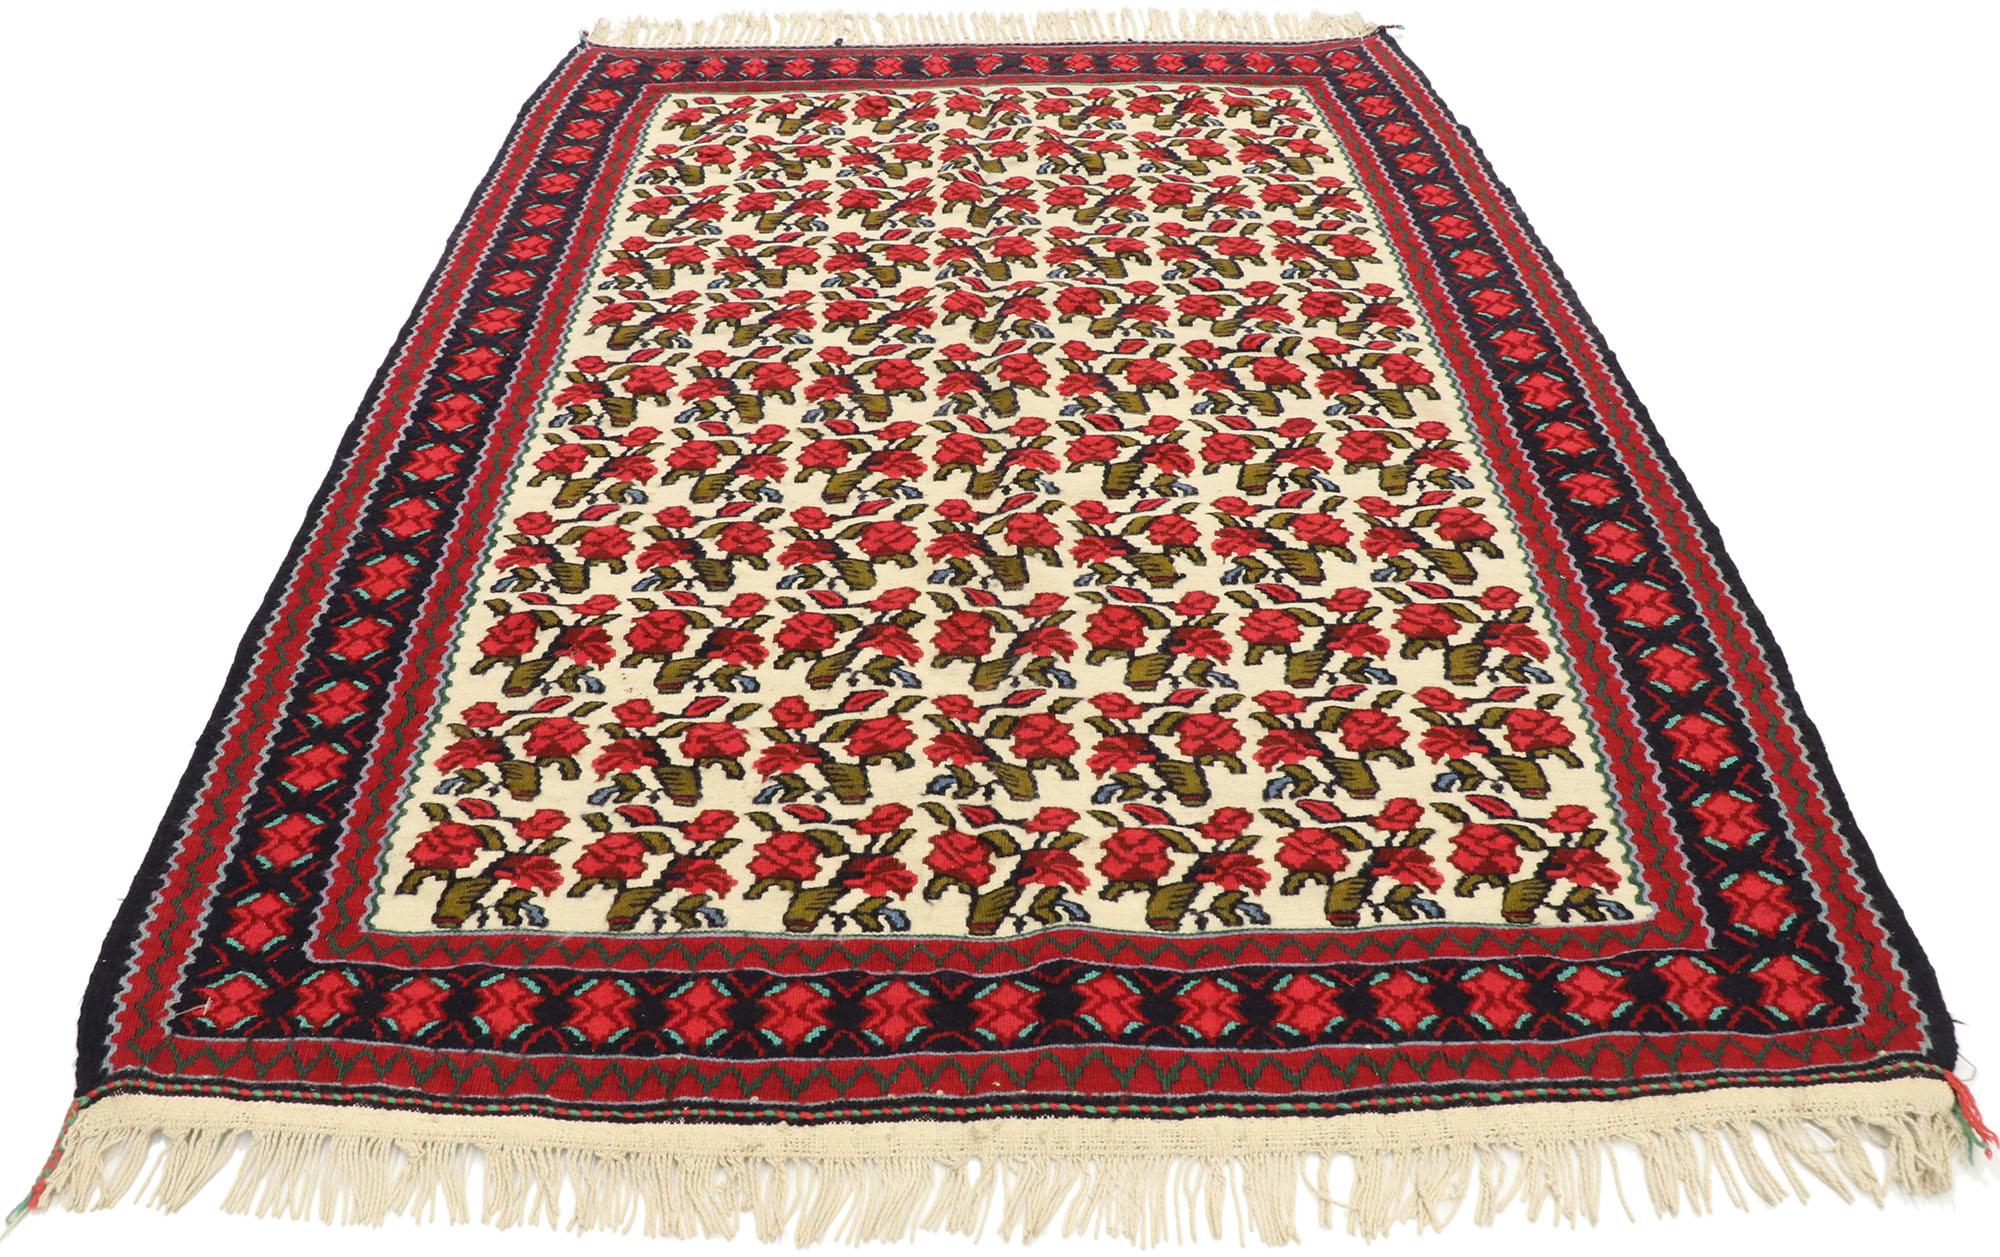 Hand-Woven Vintage Persian Floral Kilim Rug with English Tudor Manor House Style